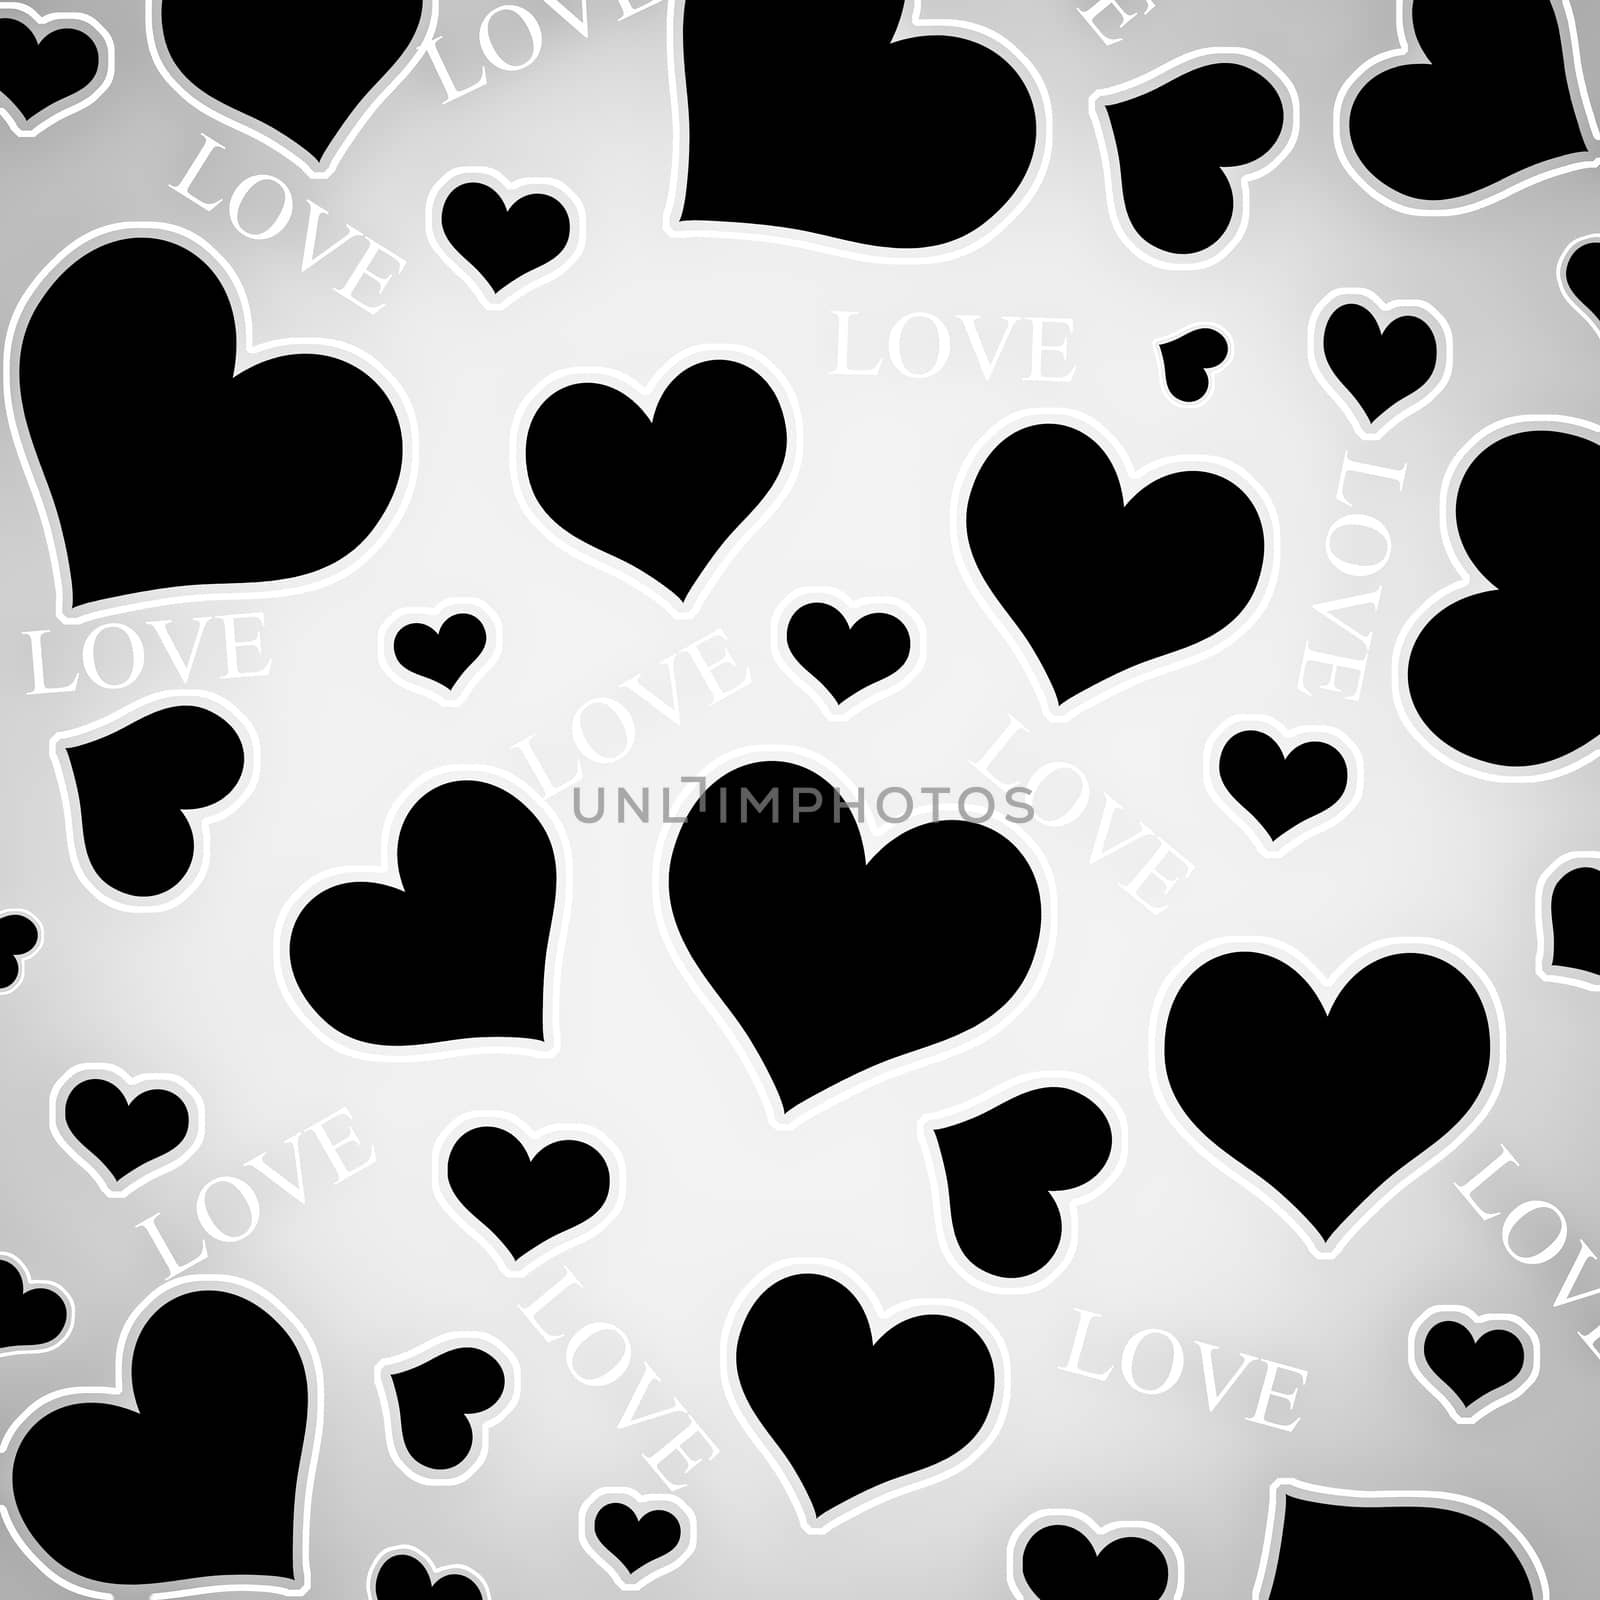 Black hearts and LOVE wording background